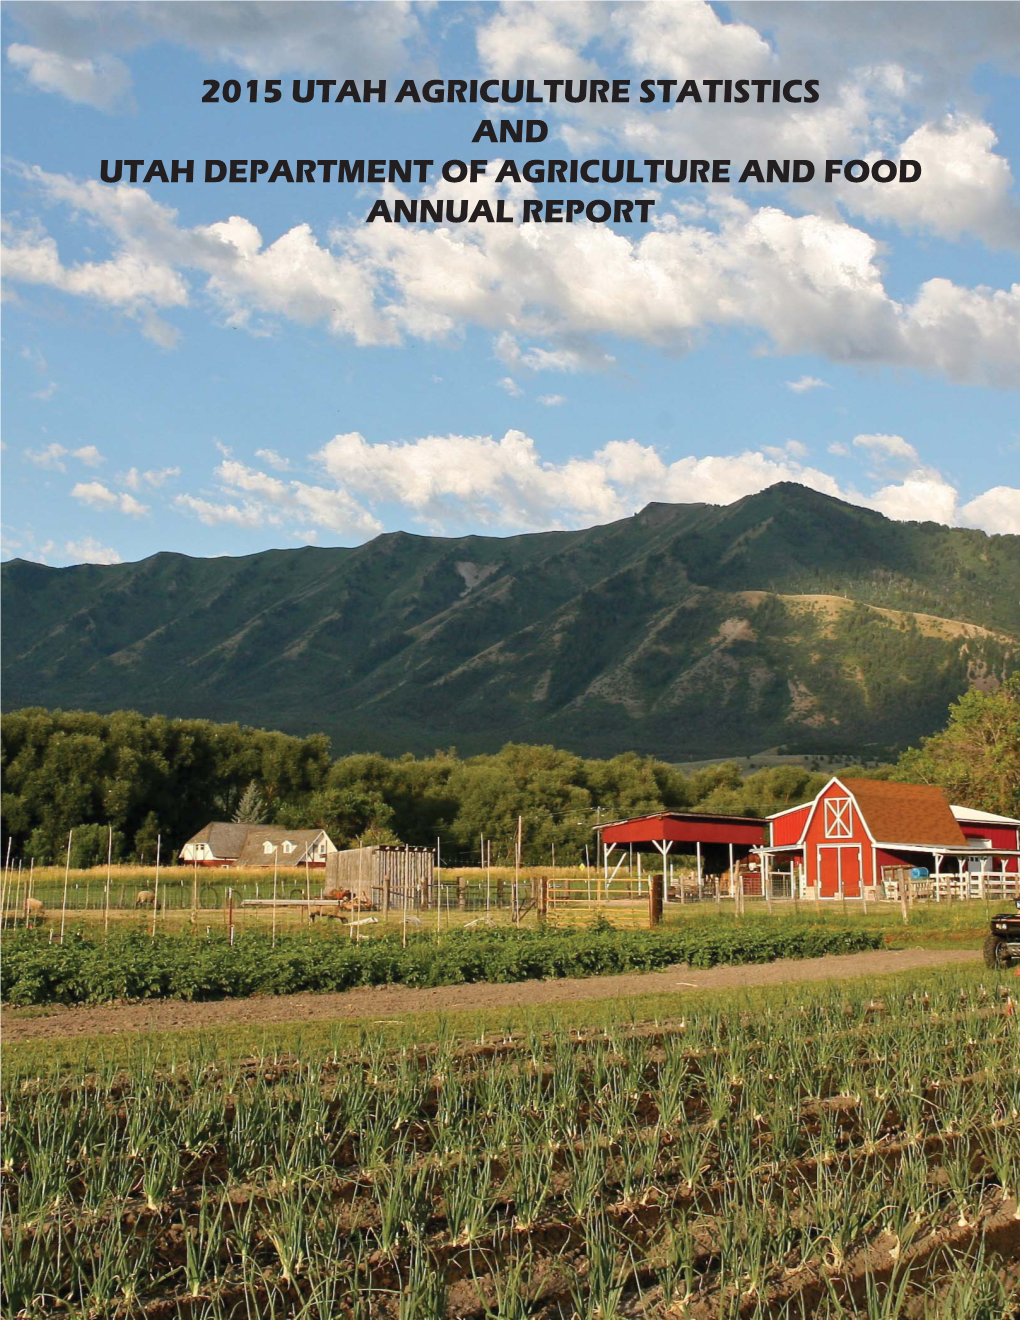 Utah Department of Agriculture and Food Annual Report